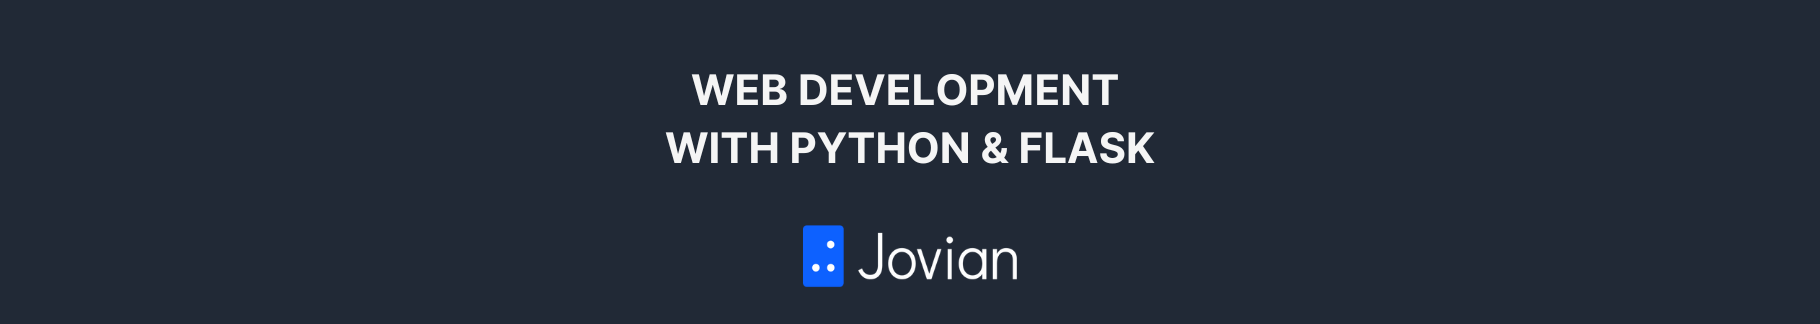 Web Development with Python and Flask